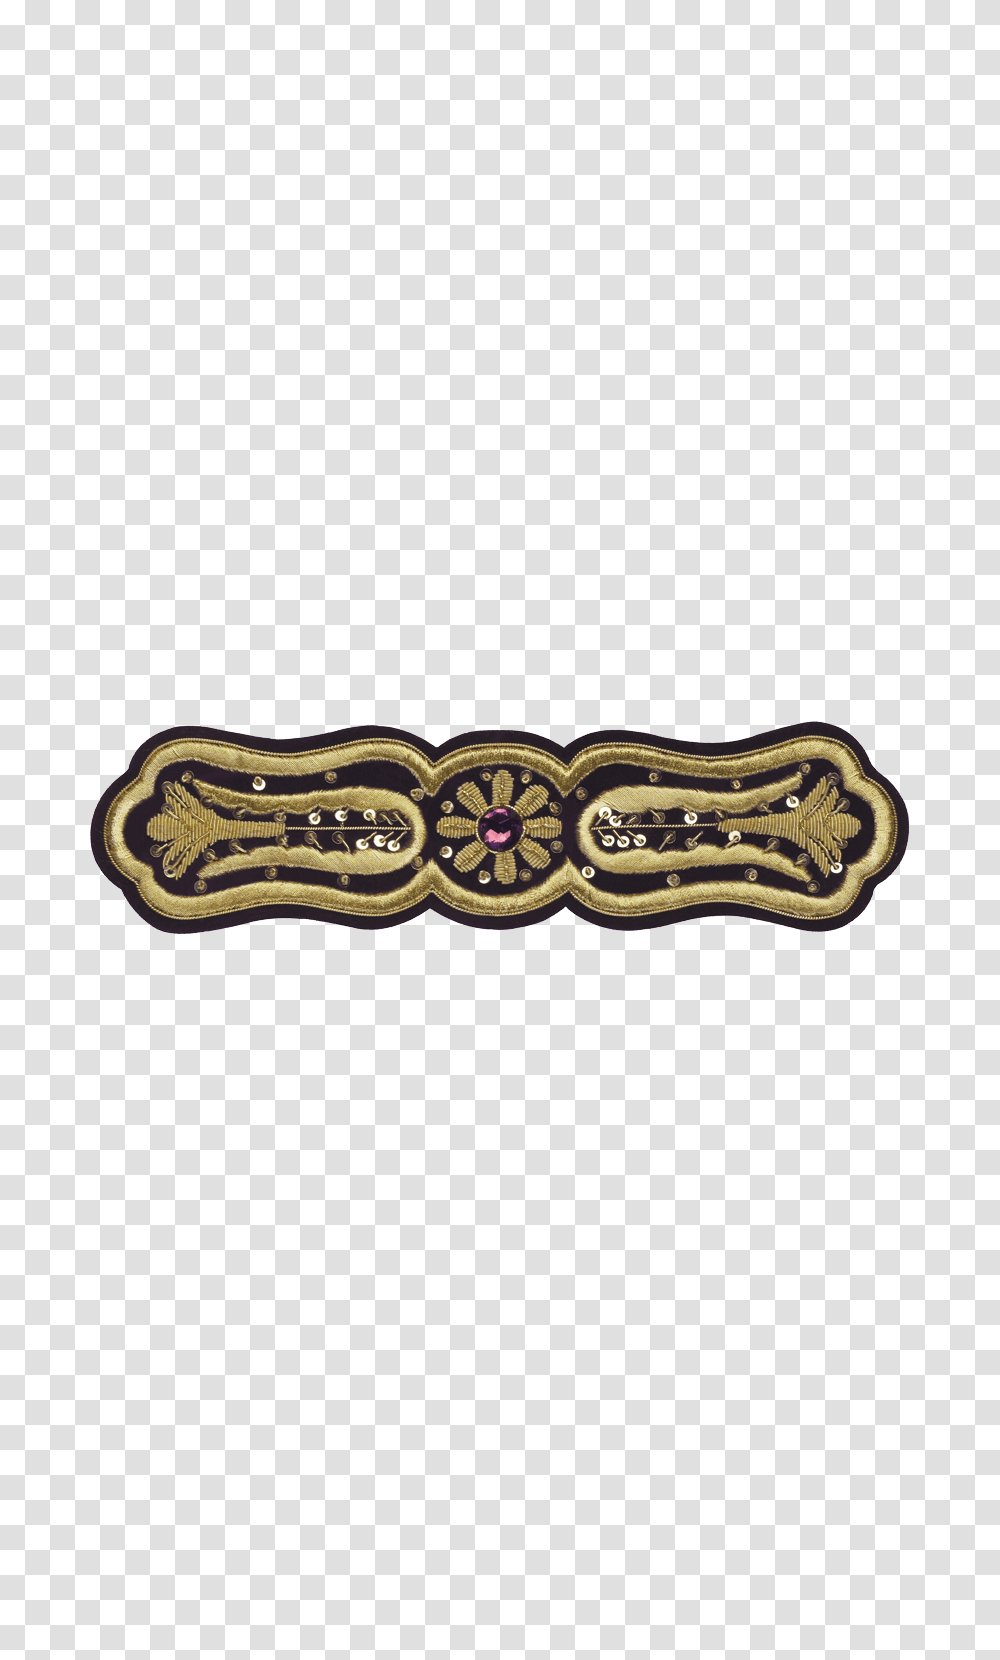 Fabric And Trim Embroidered Embroidered Emblems, Weapon, Weaponry, Rug, Blade Transparent Png